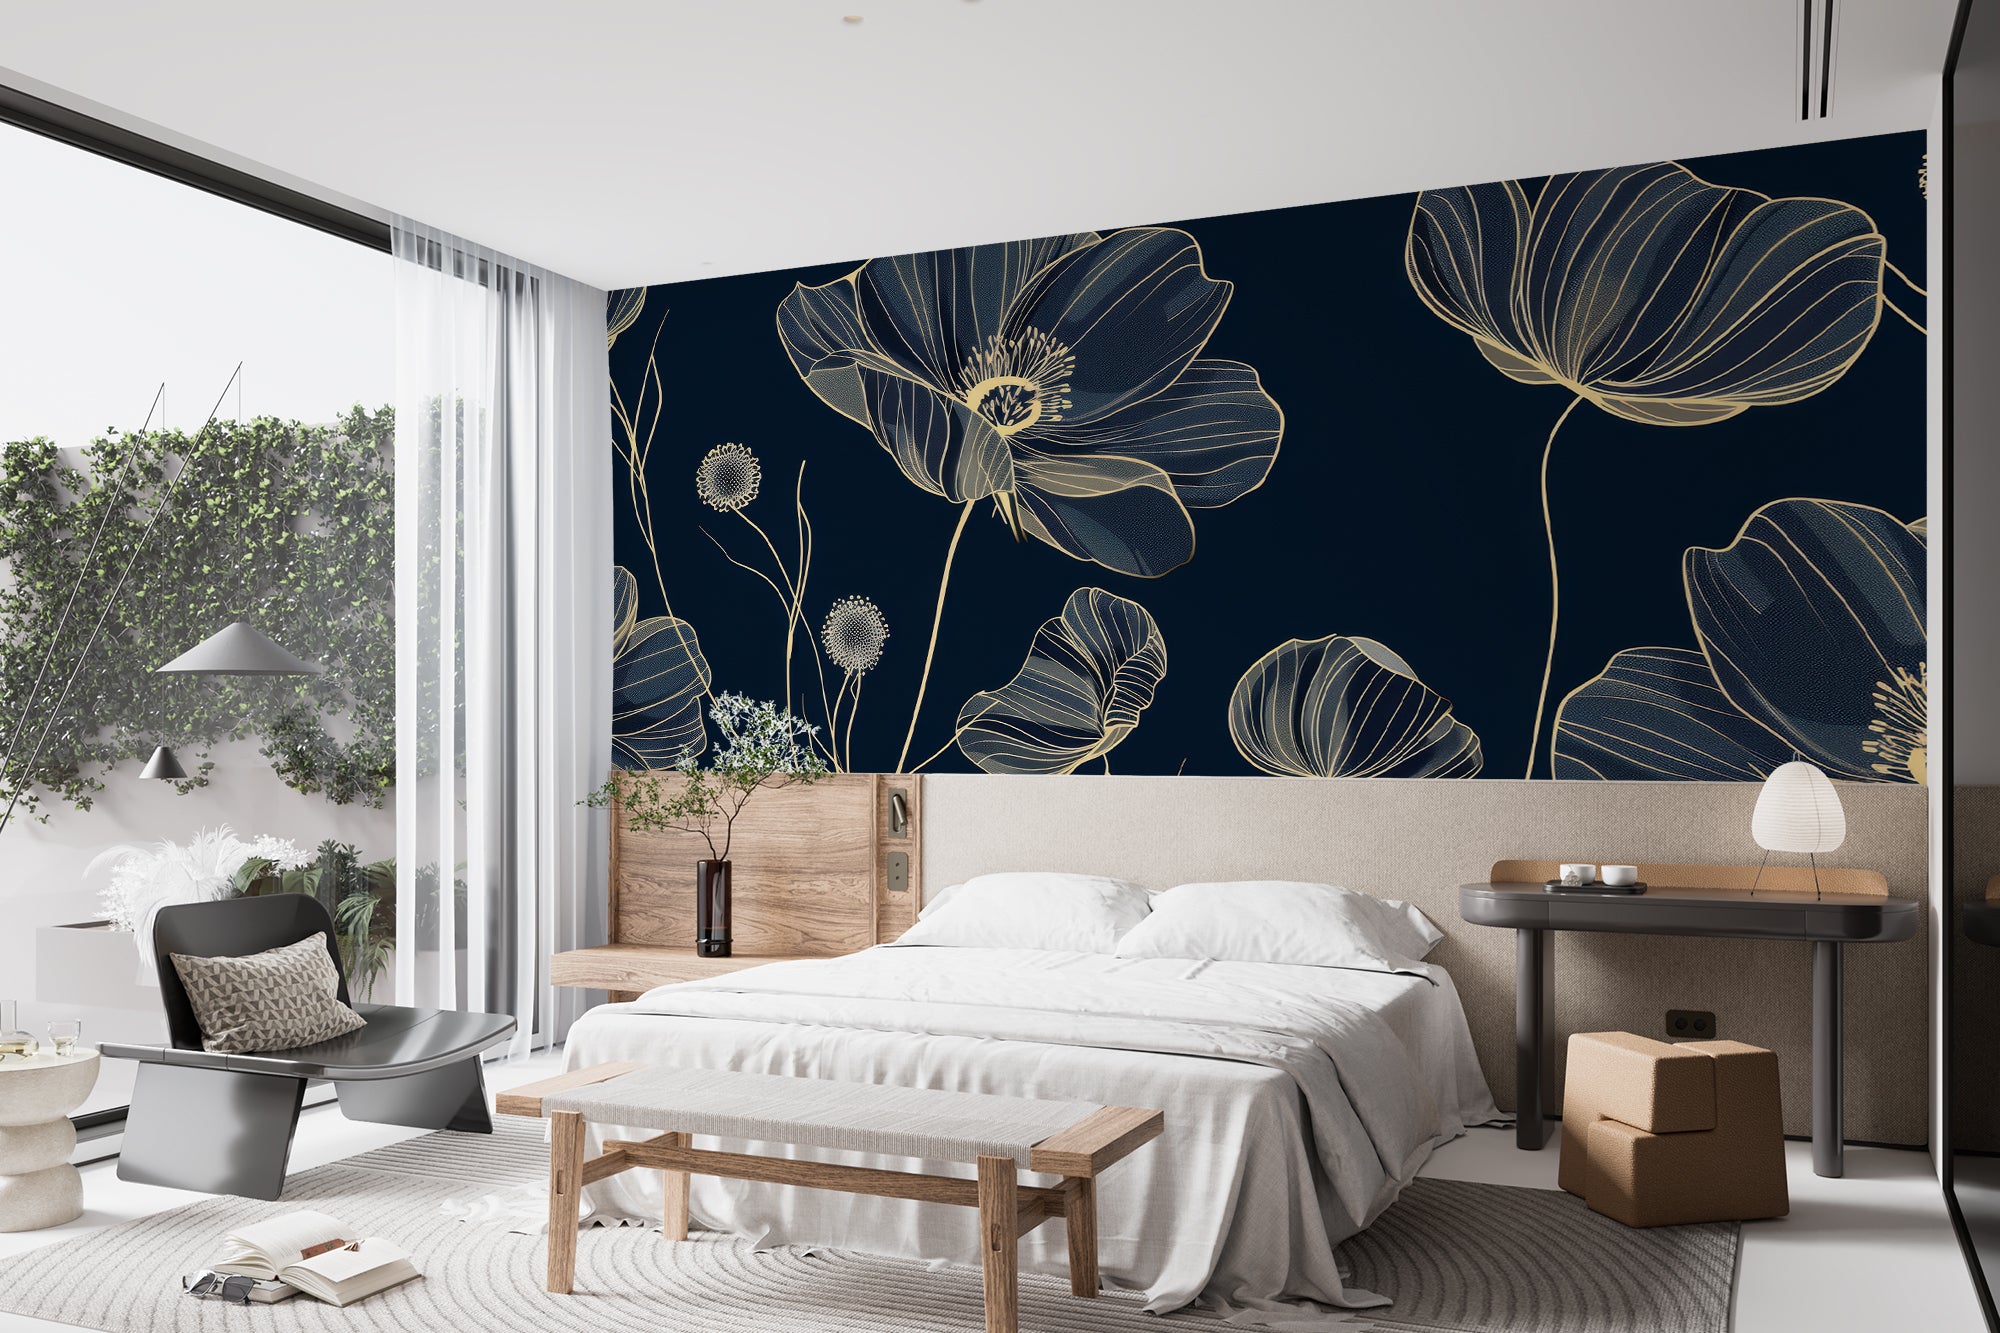 Cosmos Épanouis: Panoramic Midnight Blue Wallpaper with Floral Patterns